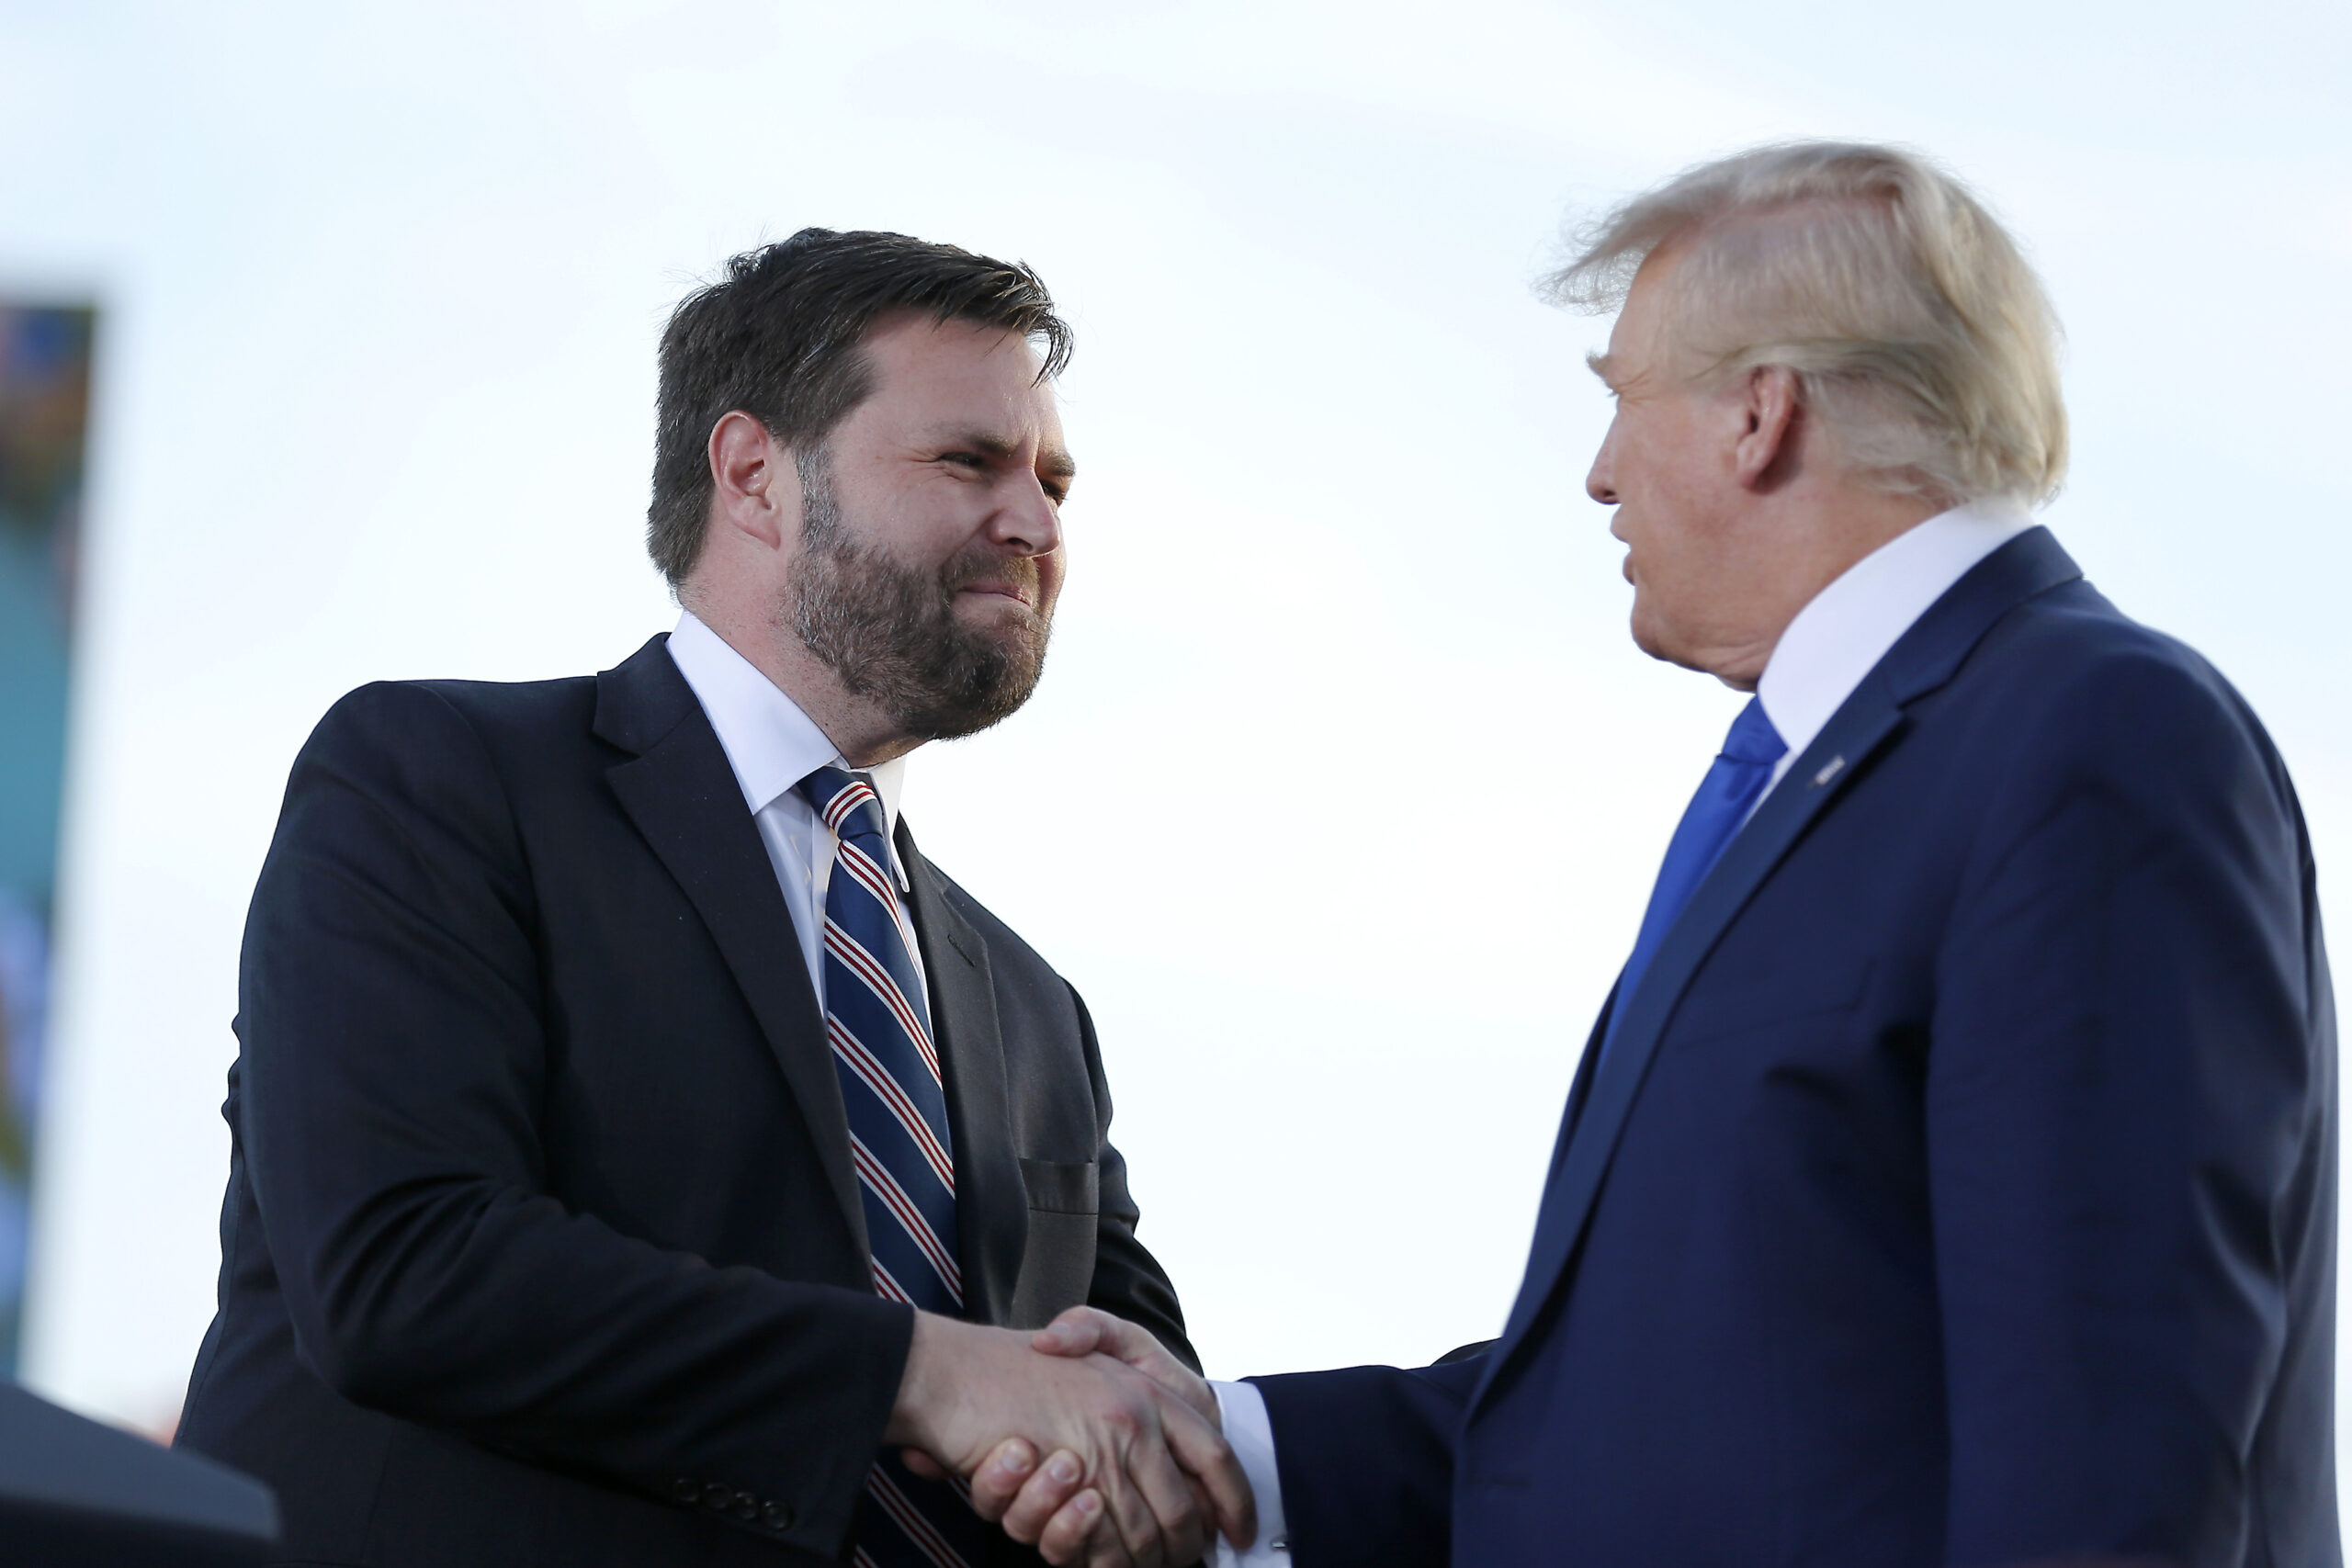 Senate candidate JD Vance, left, greets former President Donald Trump at a rally at the Delaware County Fairgrounds, Saturday, April 23, 2022, in Delaware, Ohio, to endorse Republican candidates ahead of the Ohio primary on May 3. (AP Photo/Joe Maiorana)